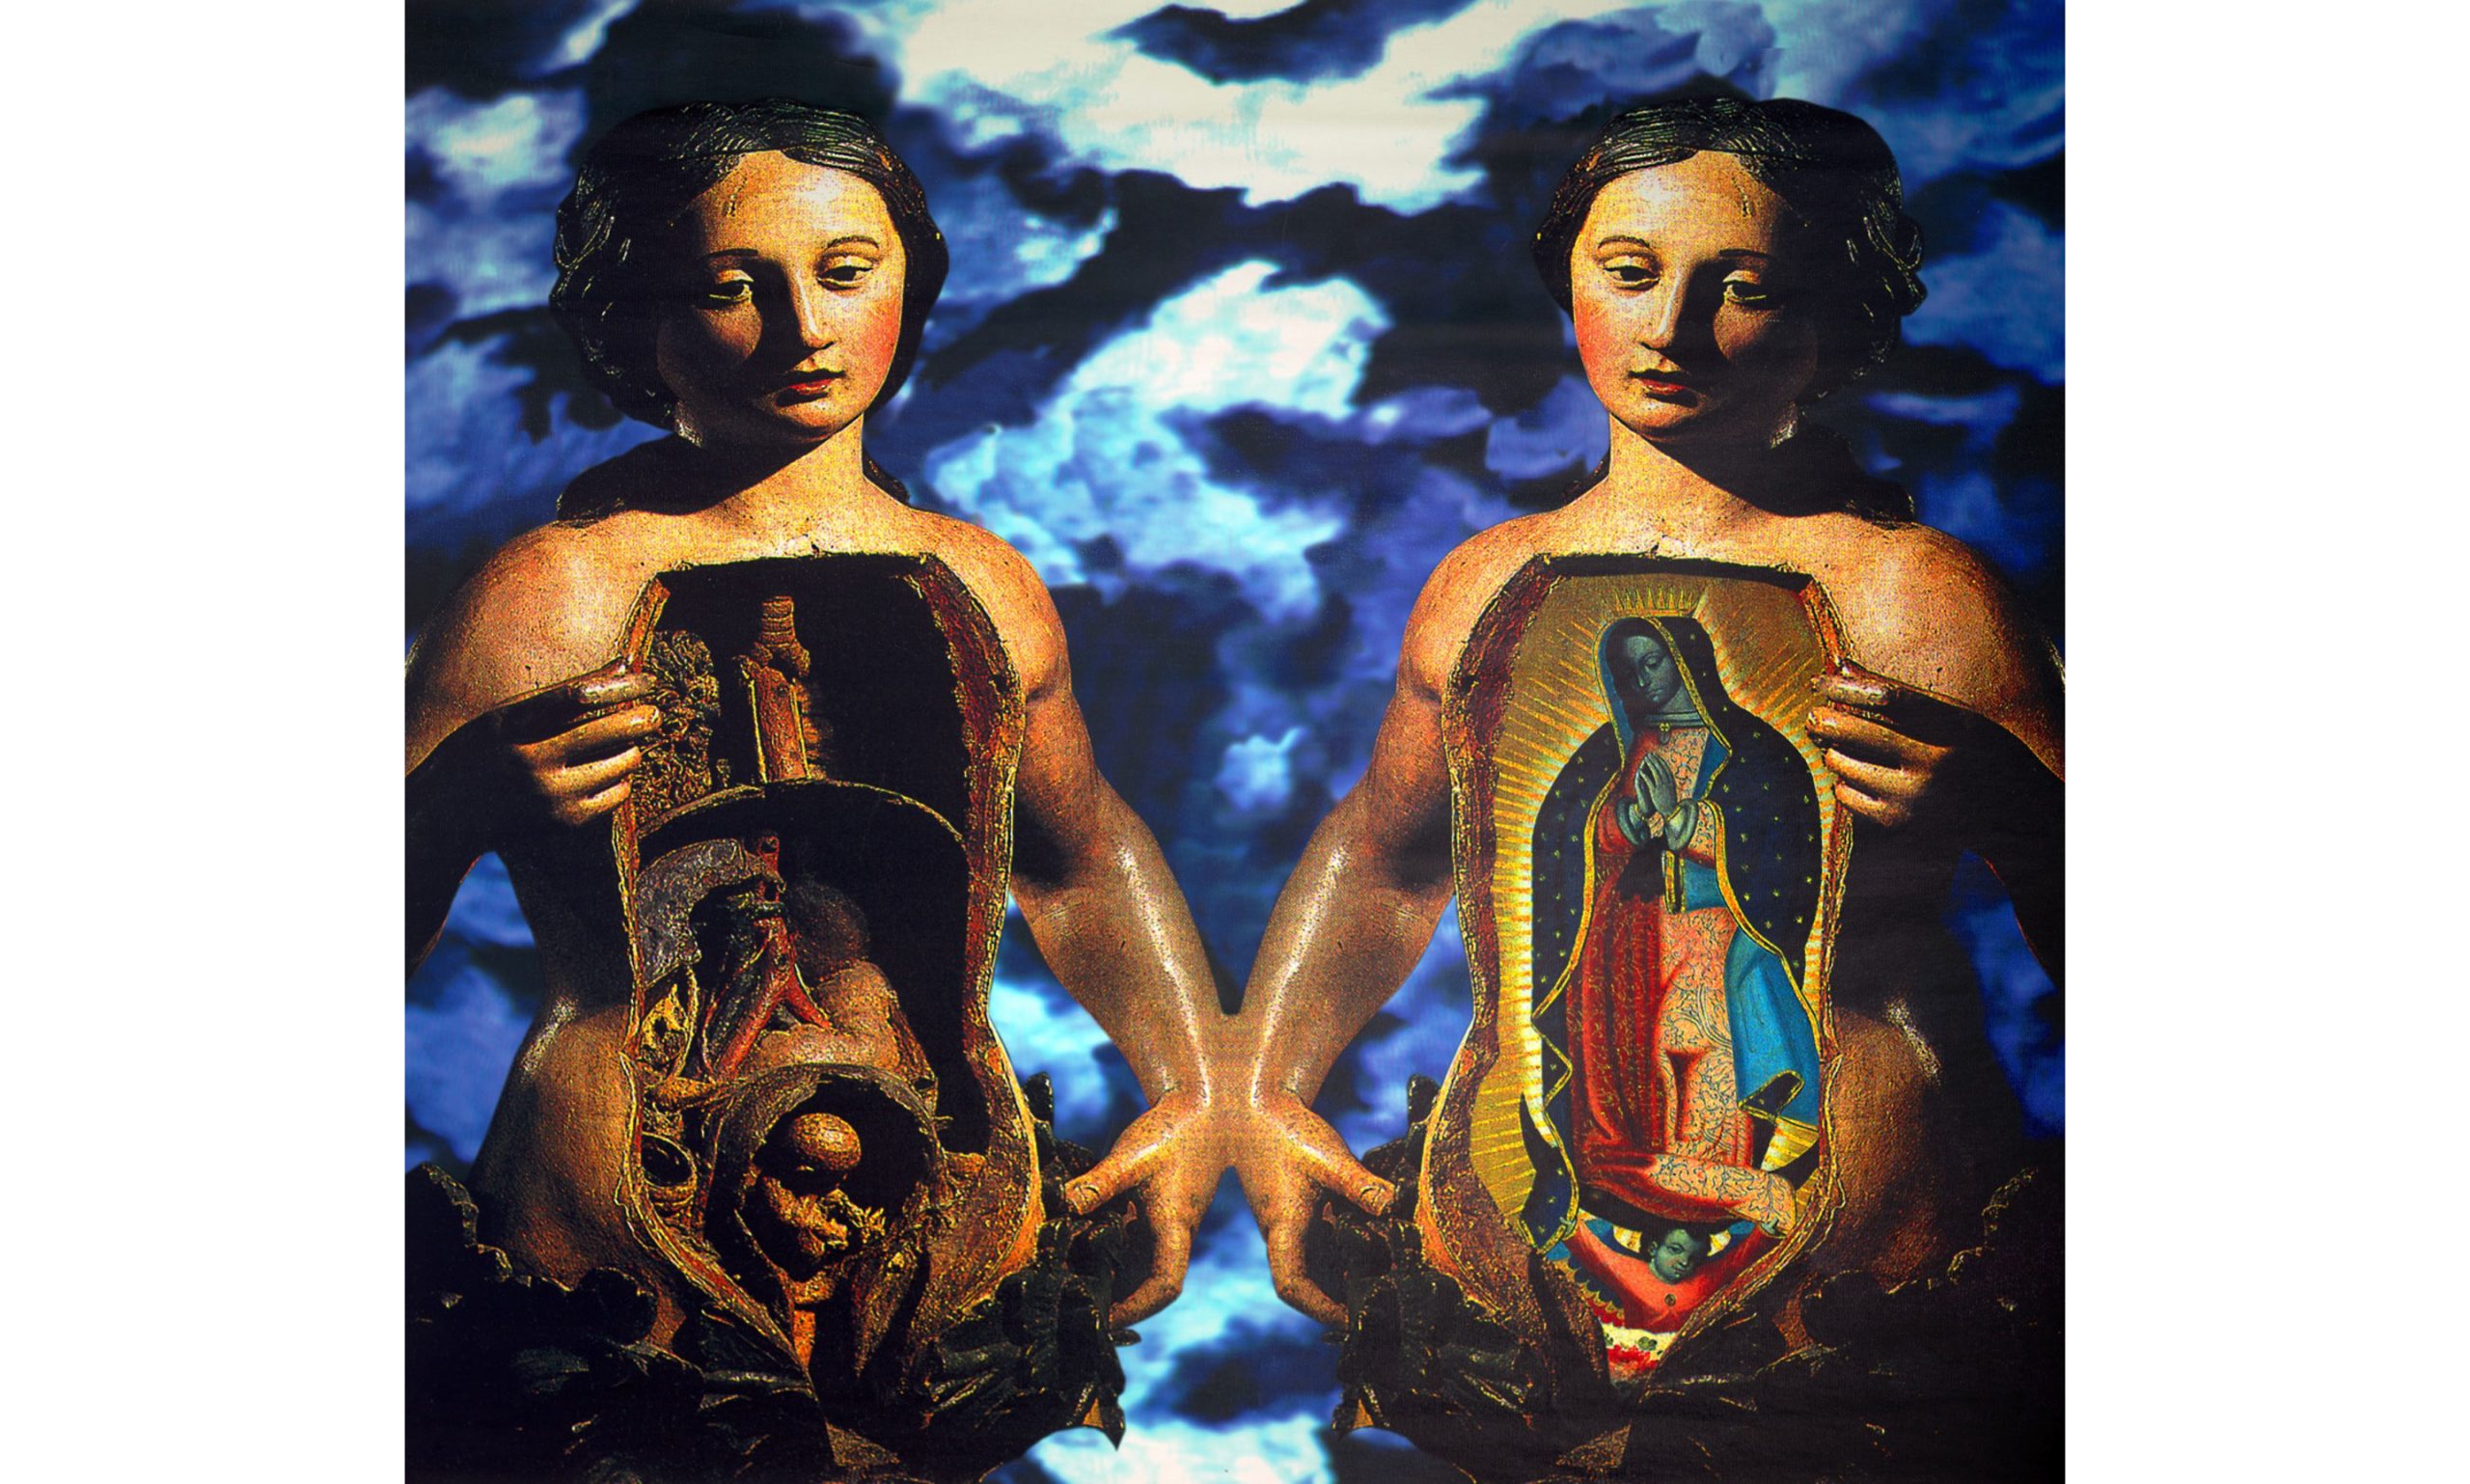 Amalia Mesa-Bains, Guadalupe Twins in Venus Envy, Chapter III: Cihuatlampa, 1997. Giclee print; 14 x 36 in. Courtesy of the artist and Rena Bransten Gallery, San Francisco.